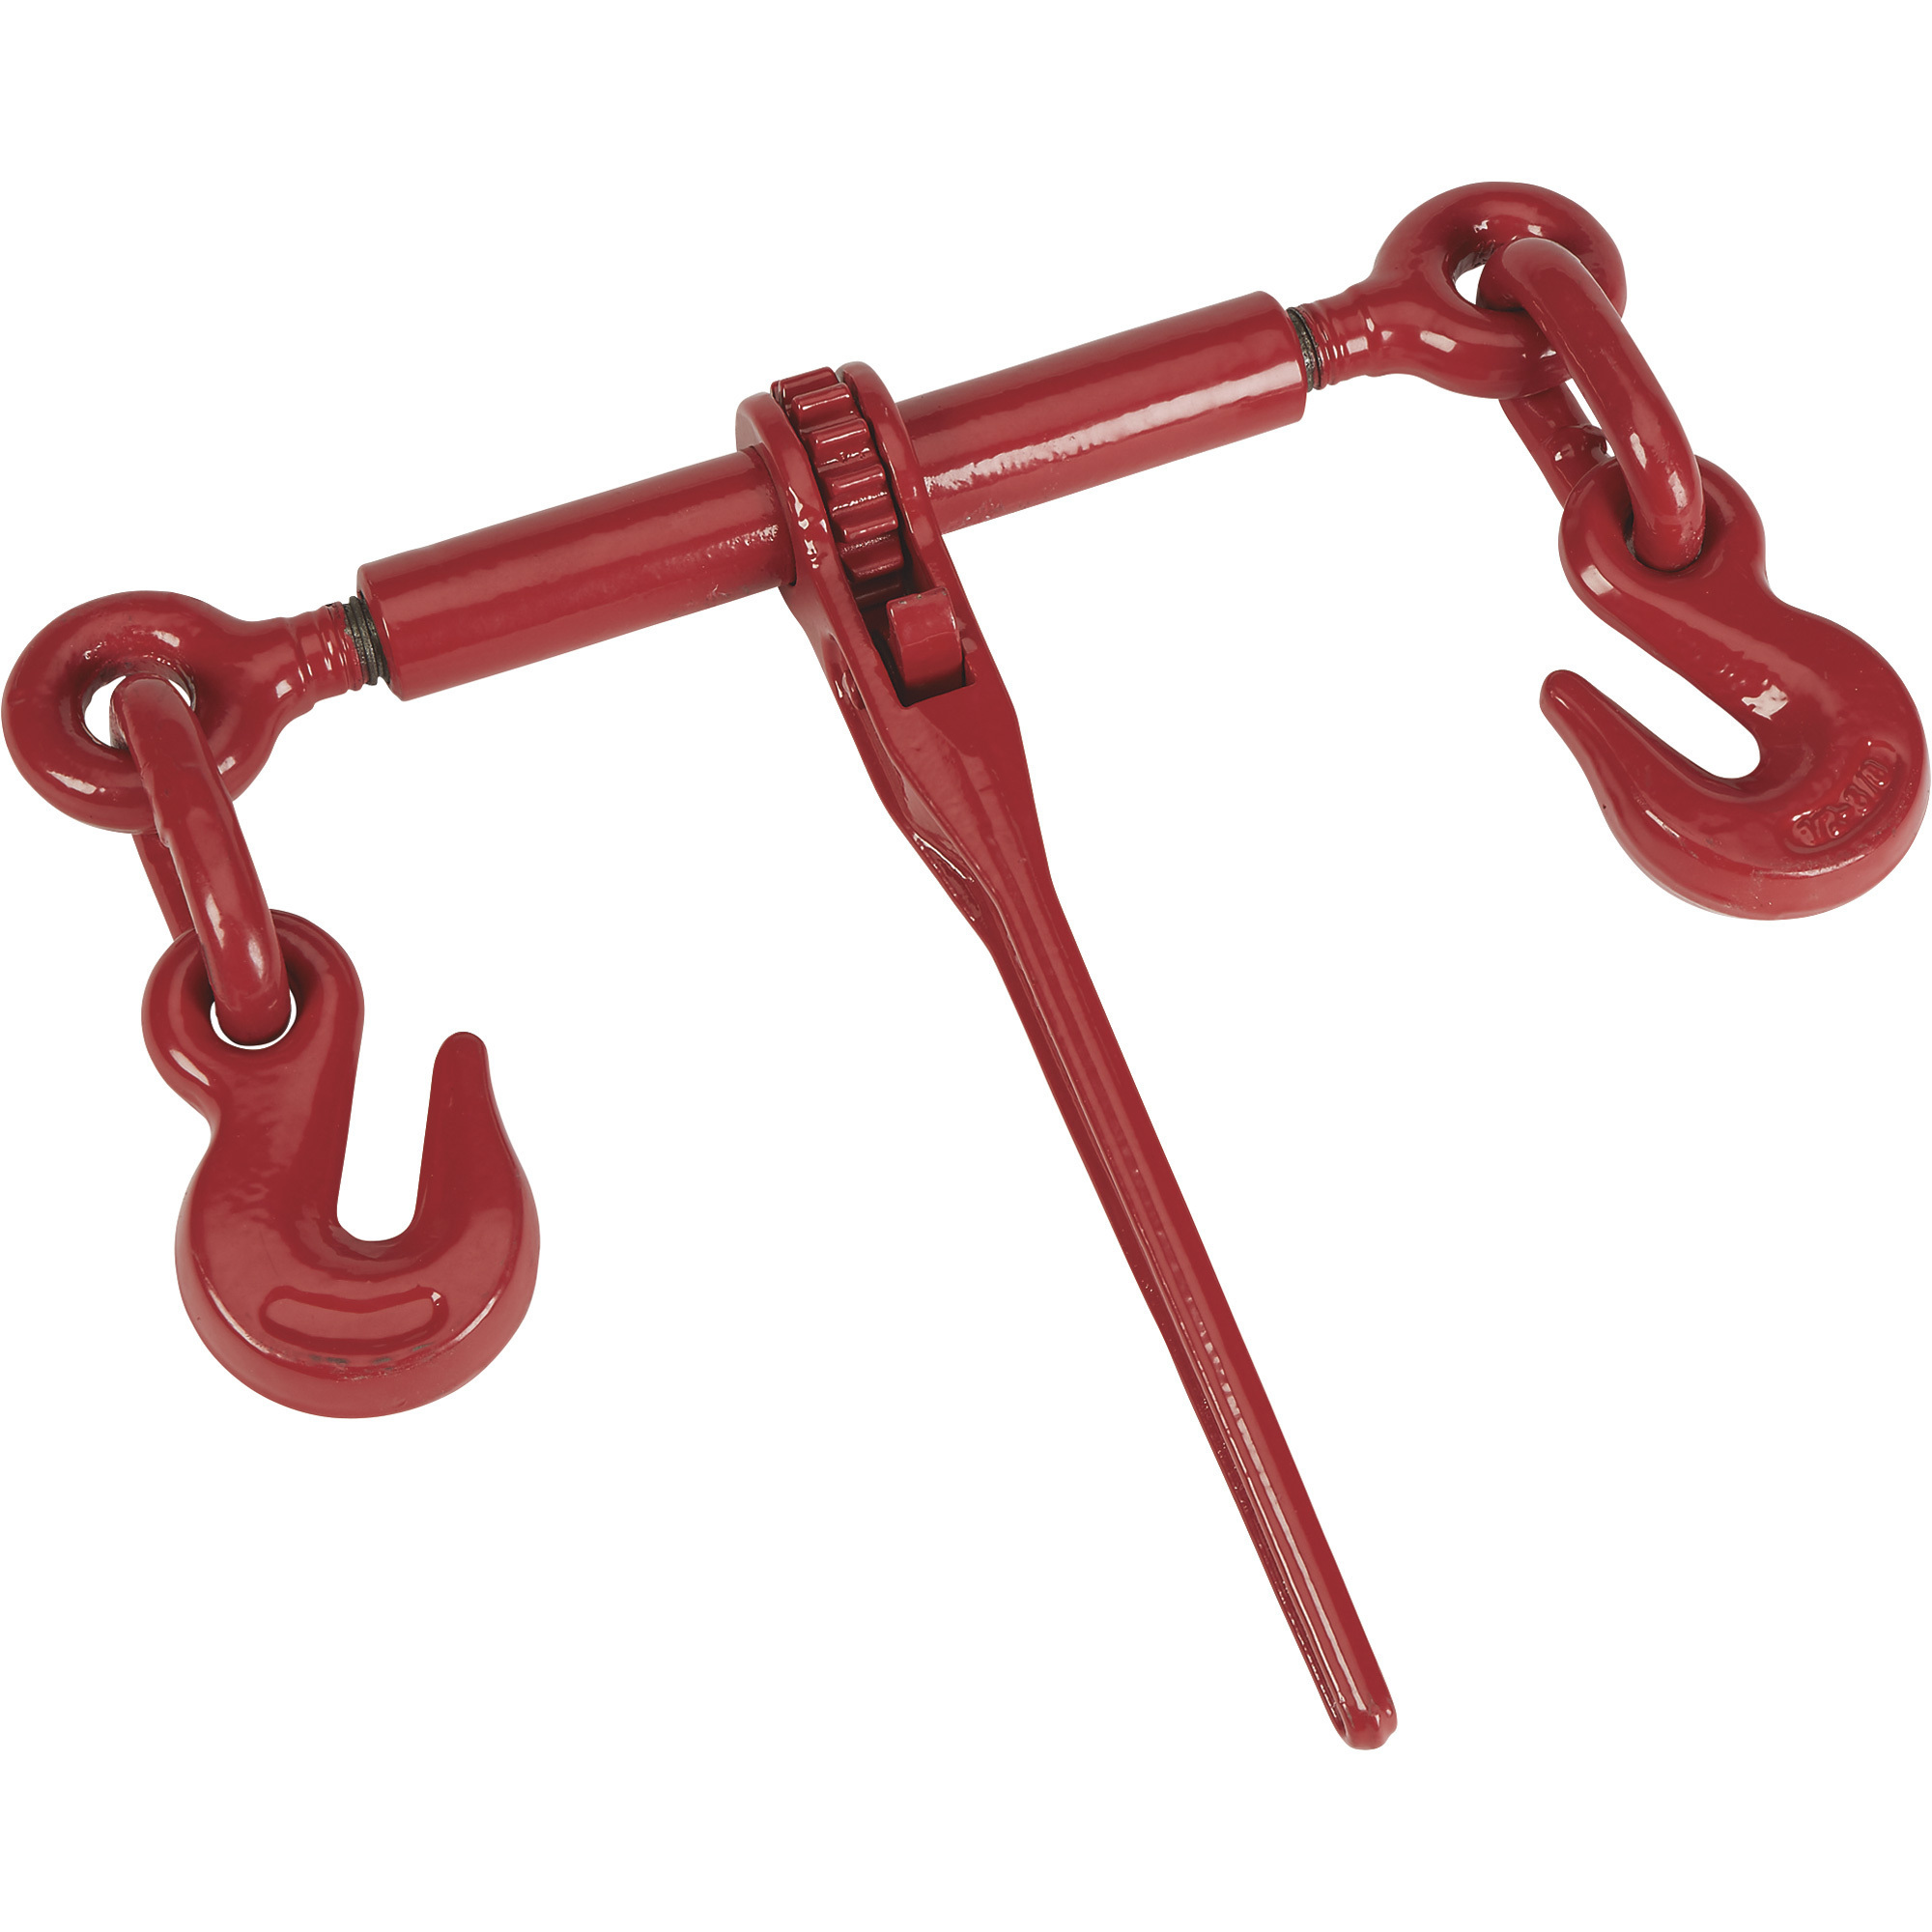 Ultra-Tow 1/2Inch Ratchet Chain Binder, 13,000-Lb. Load Capacity